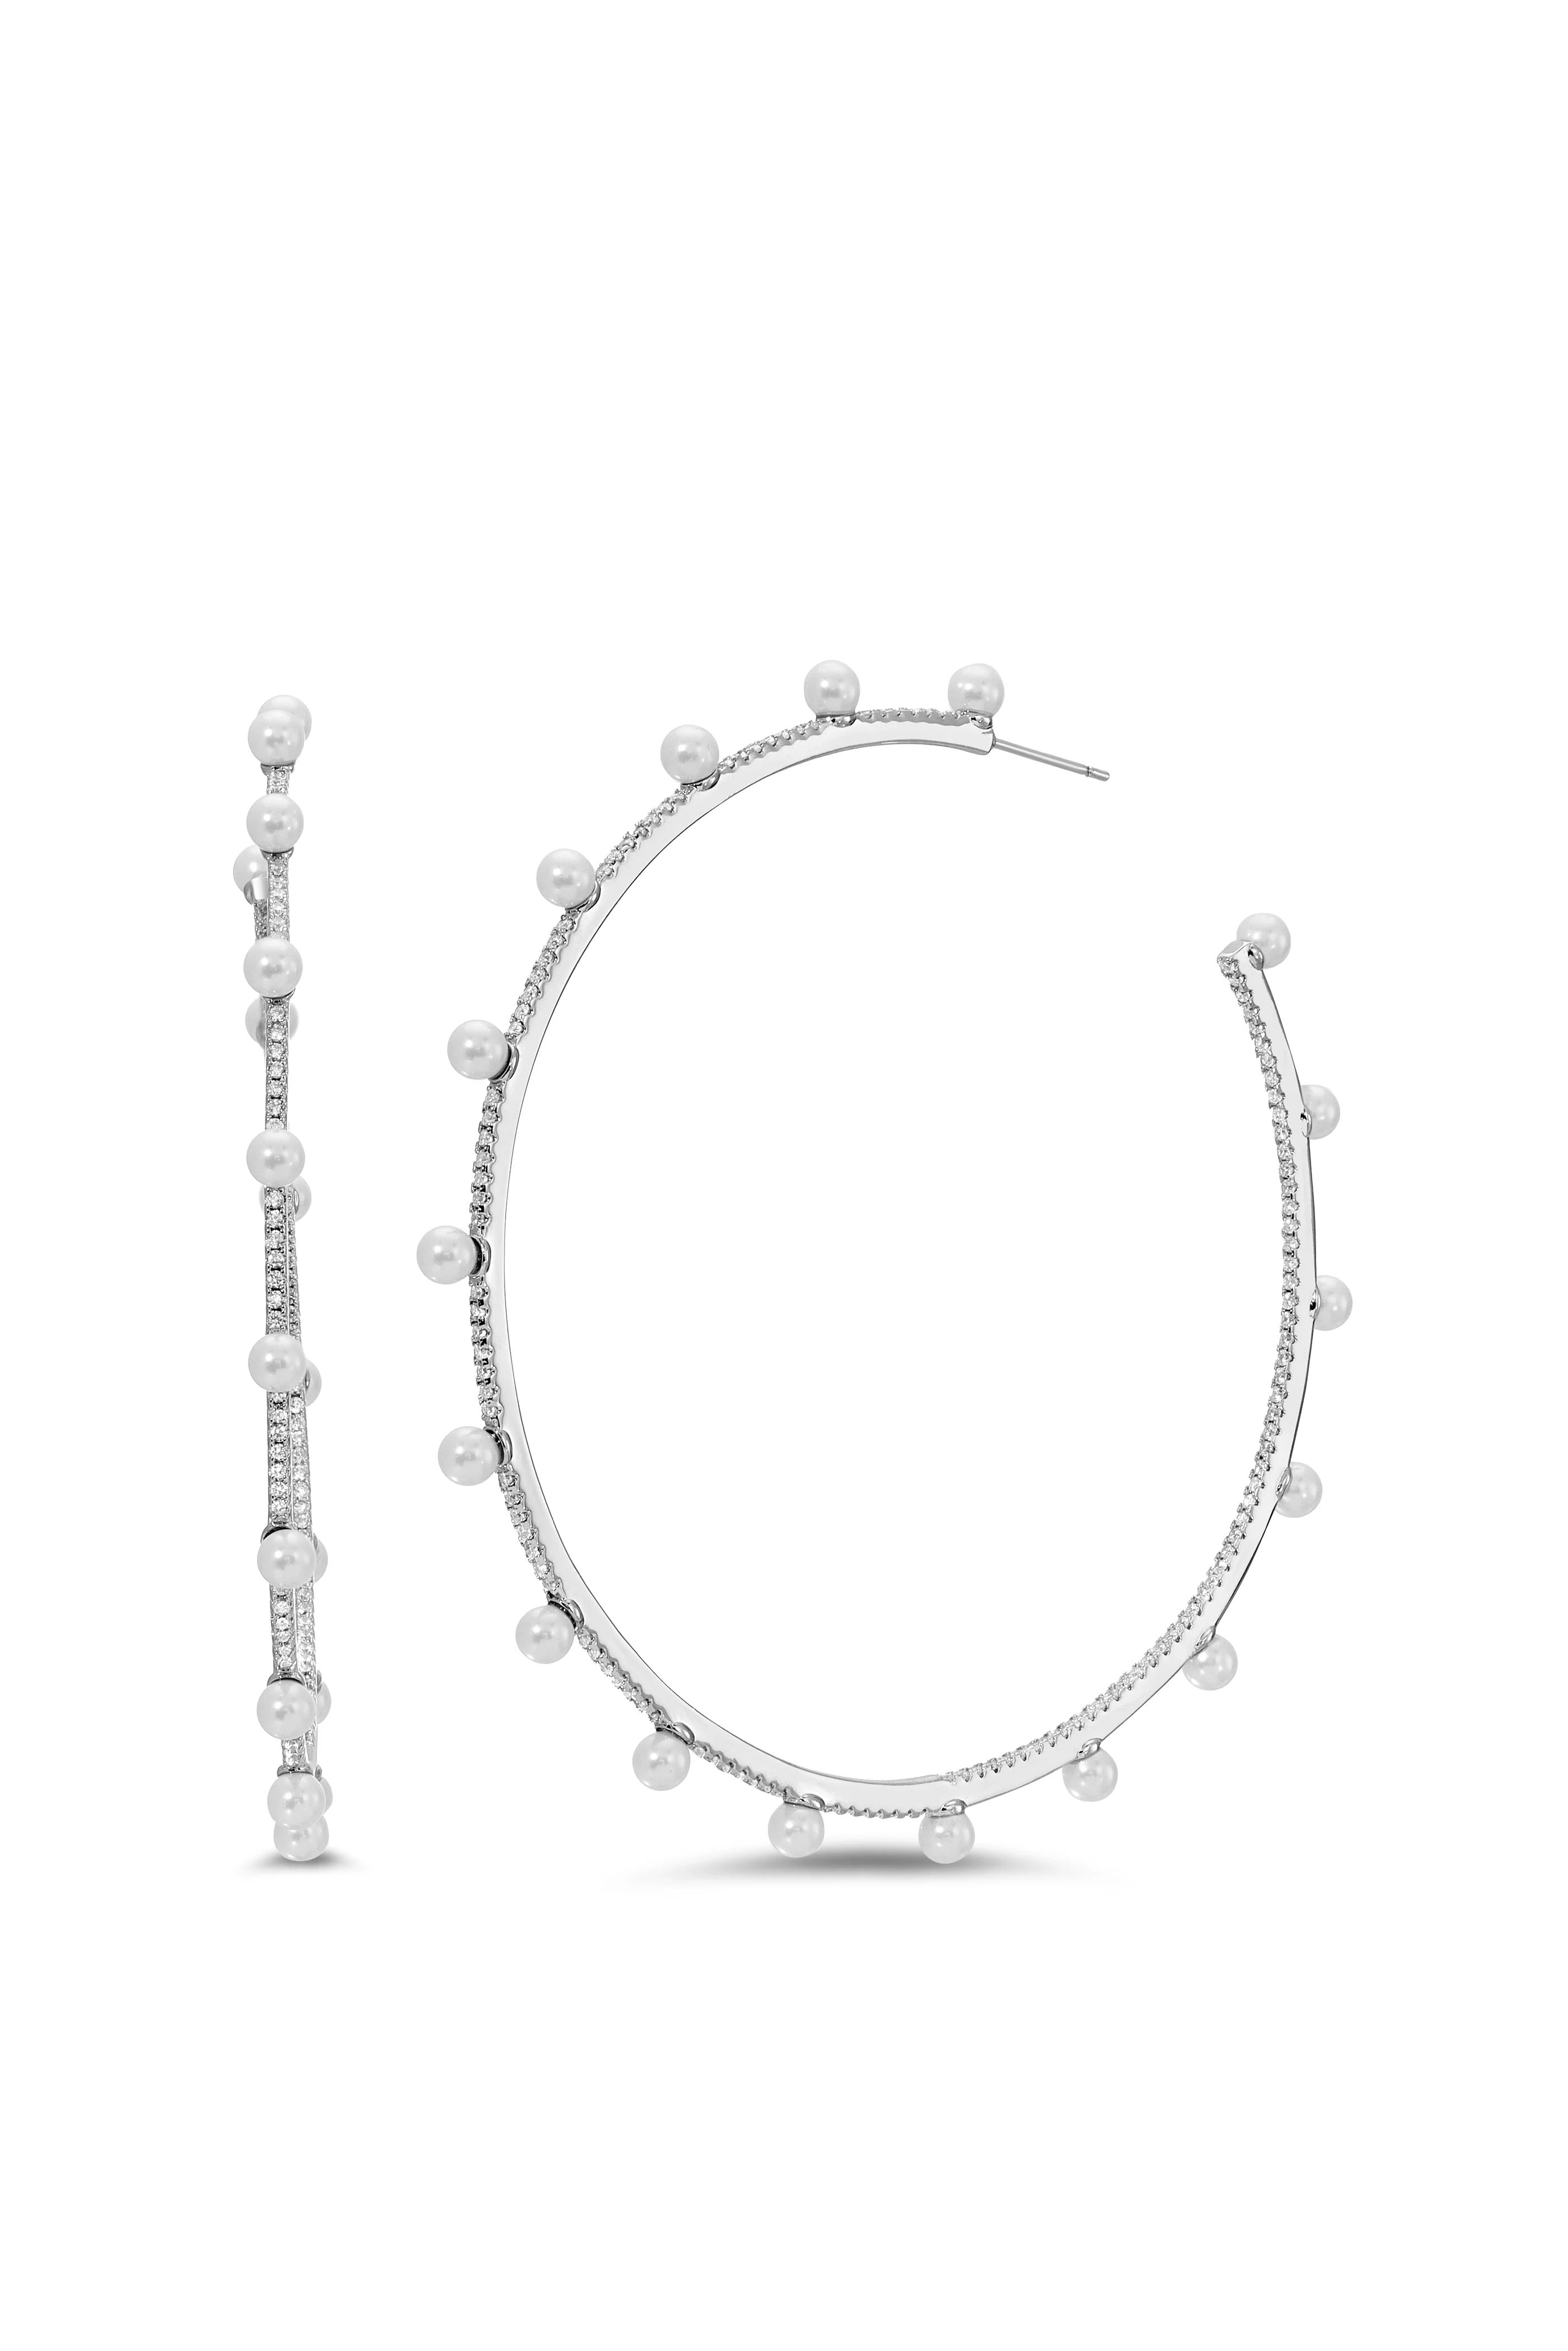 Large Pave Molly Hoops | Lili Claspe